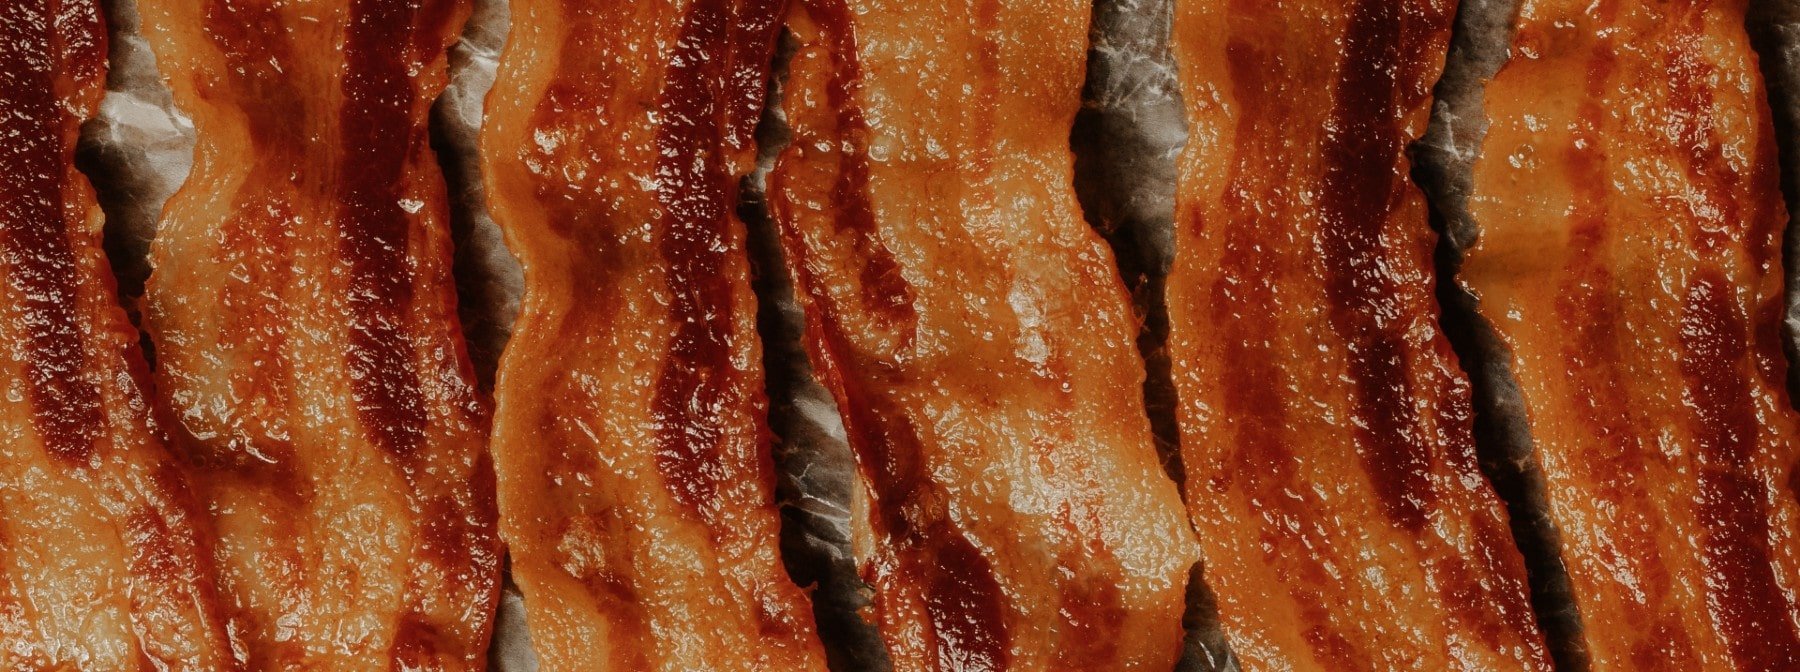 41% Of American Kids Think Bacon Comes From Plants, Study Says